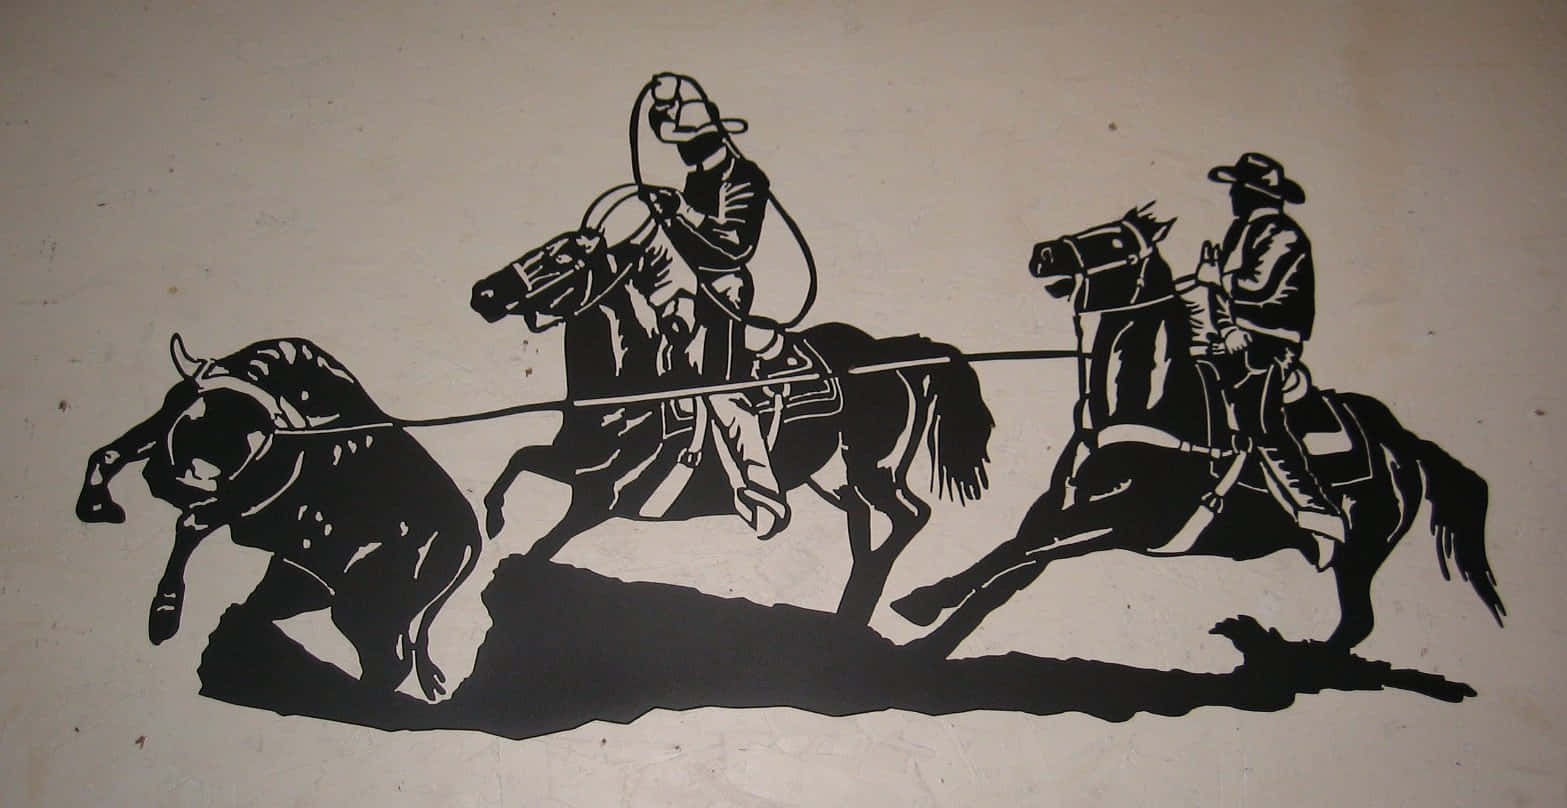 A Metal Wall Art Of A Bullfighter And A Horse Pulling A Bull